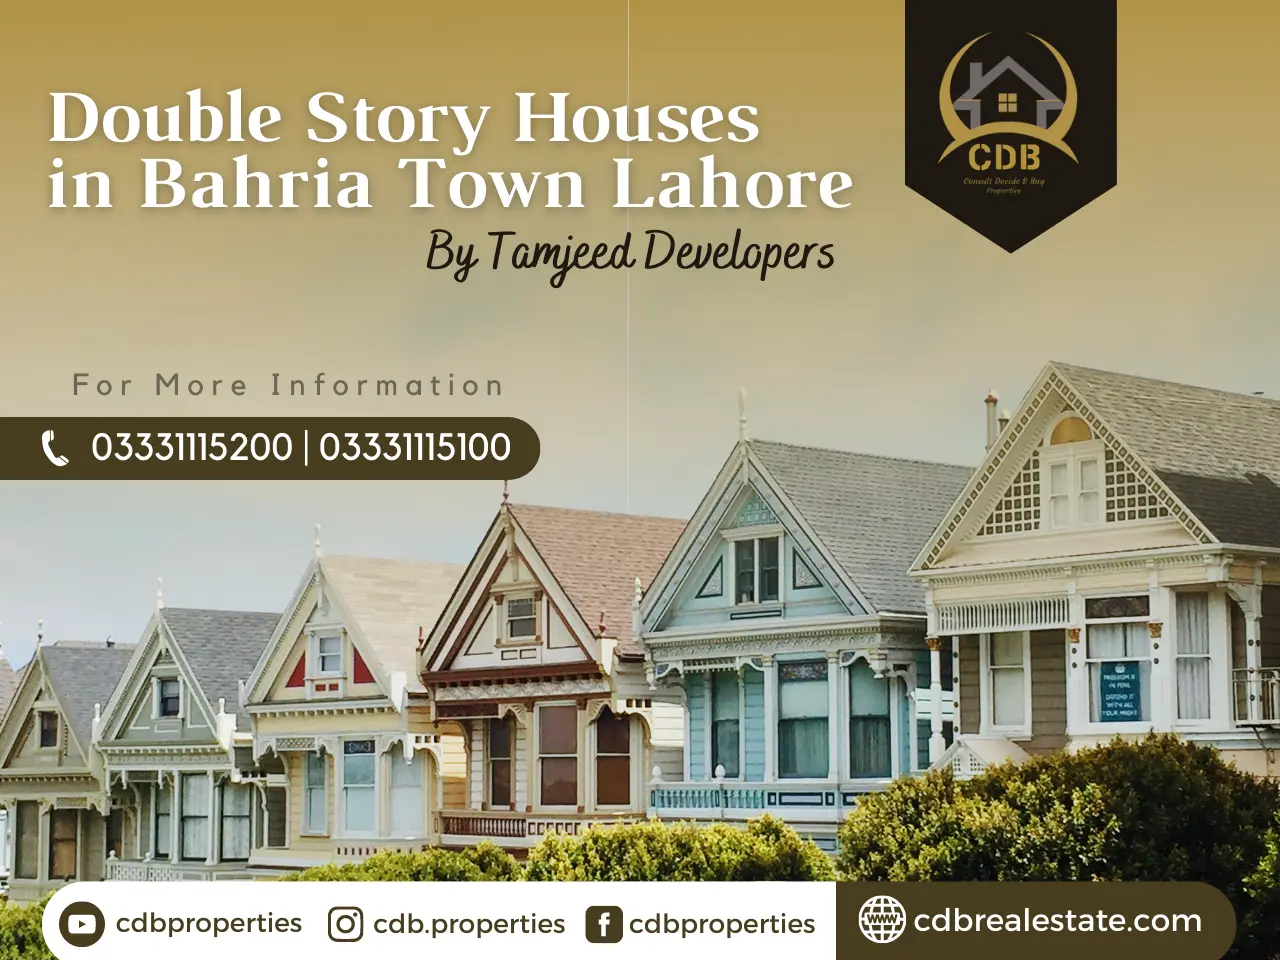 Double Story Houses in Bahria Town Lahore - Tamjeed Developers